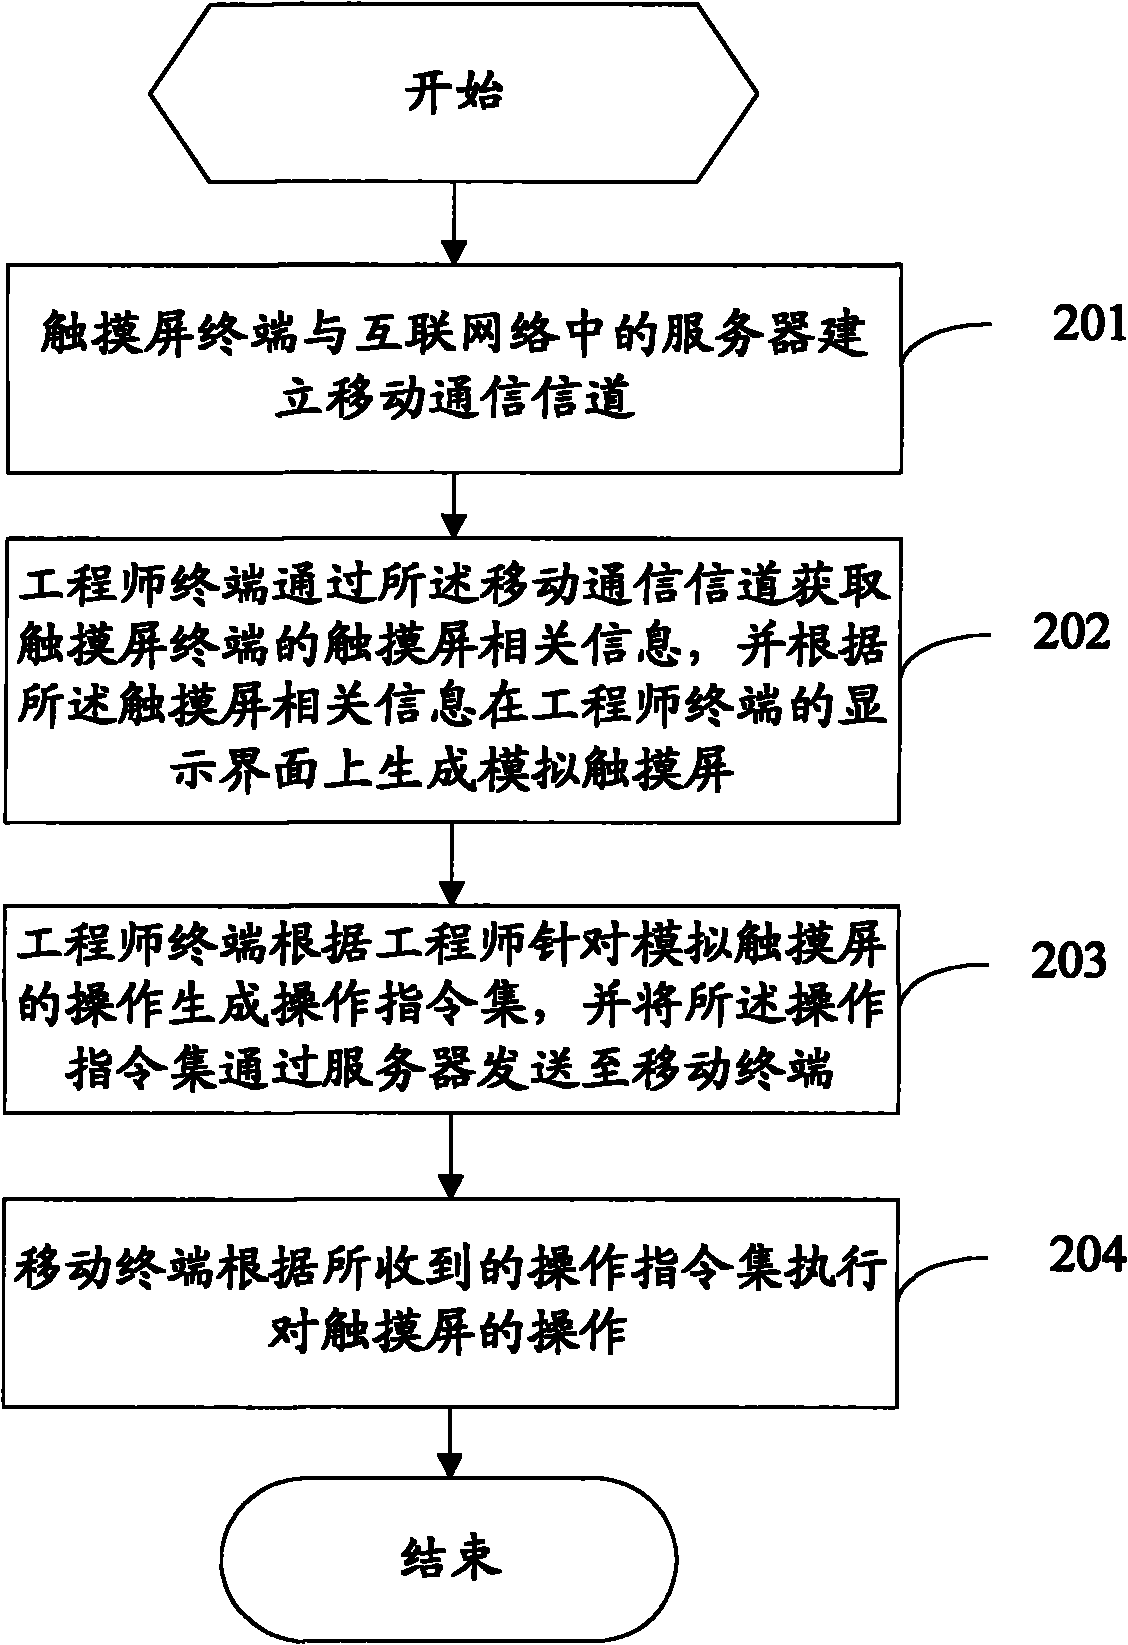 Method and system for providing remote services for touch screen terminal